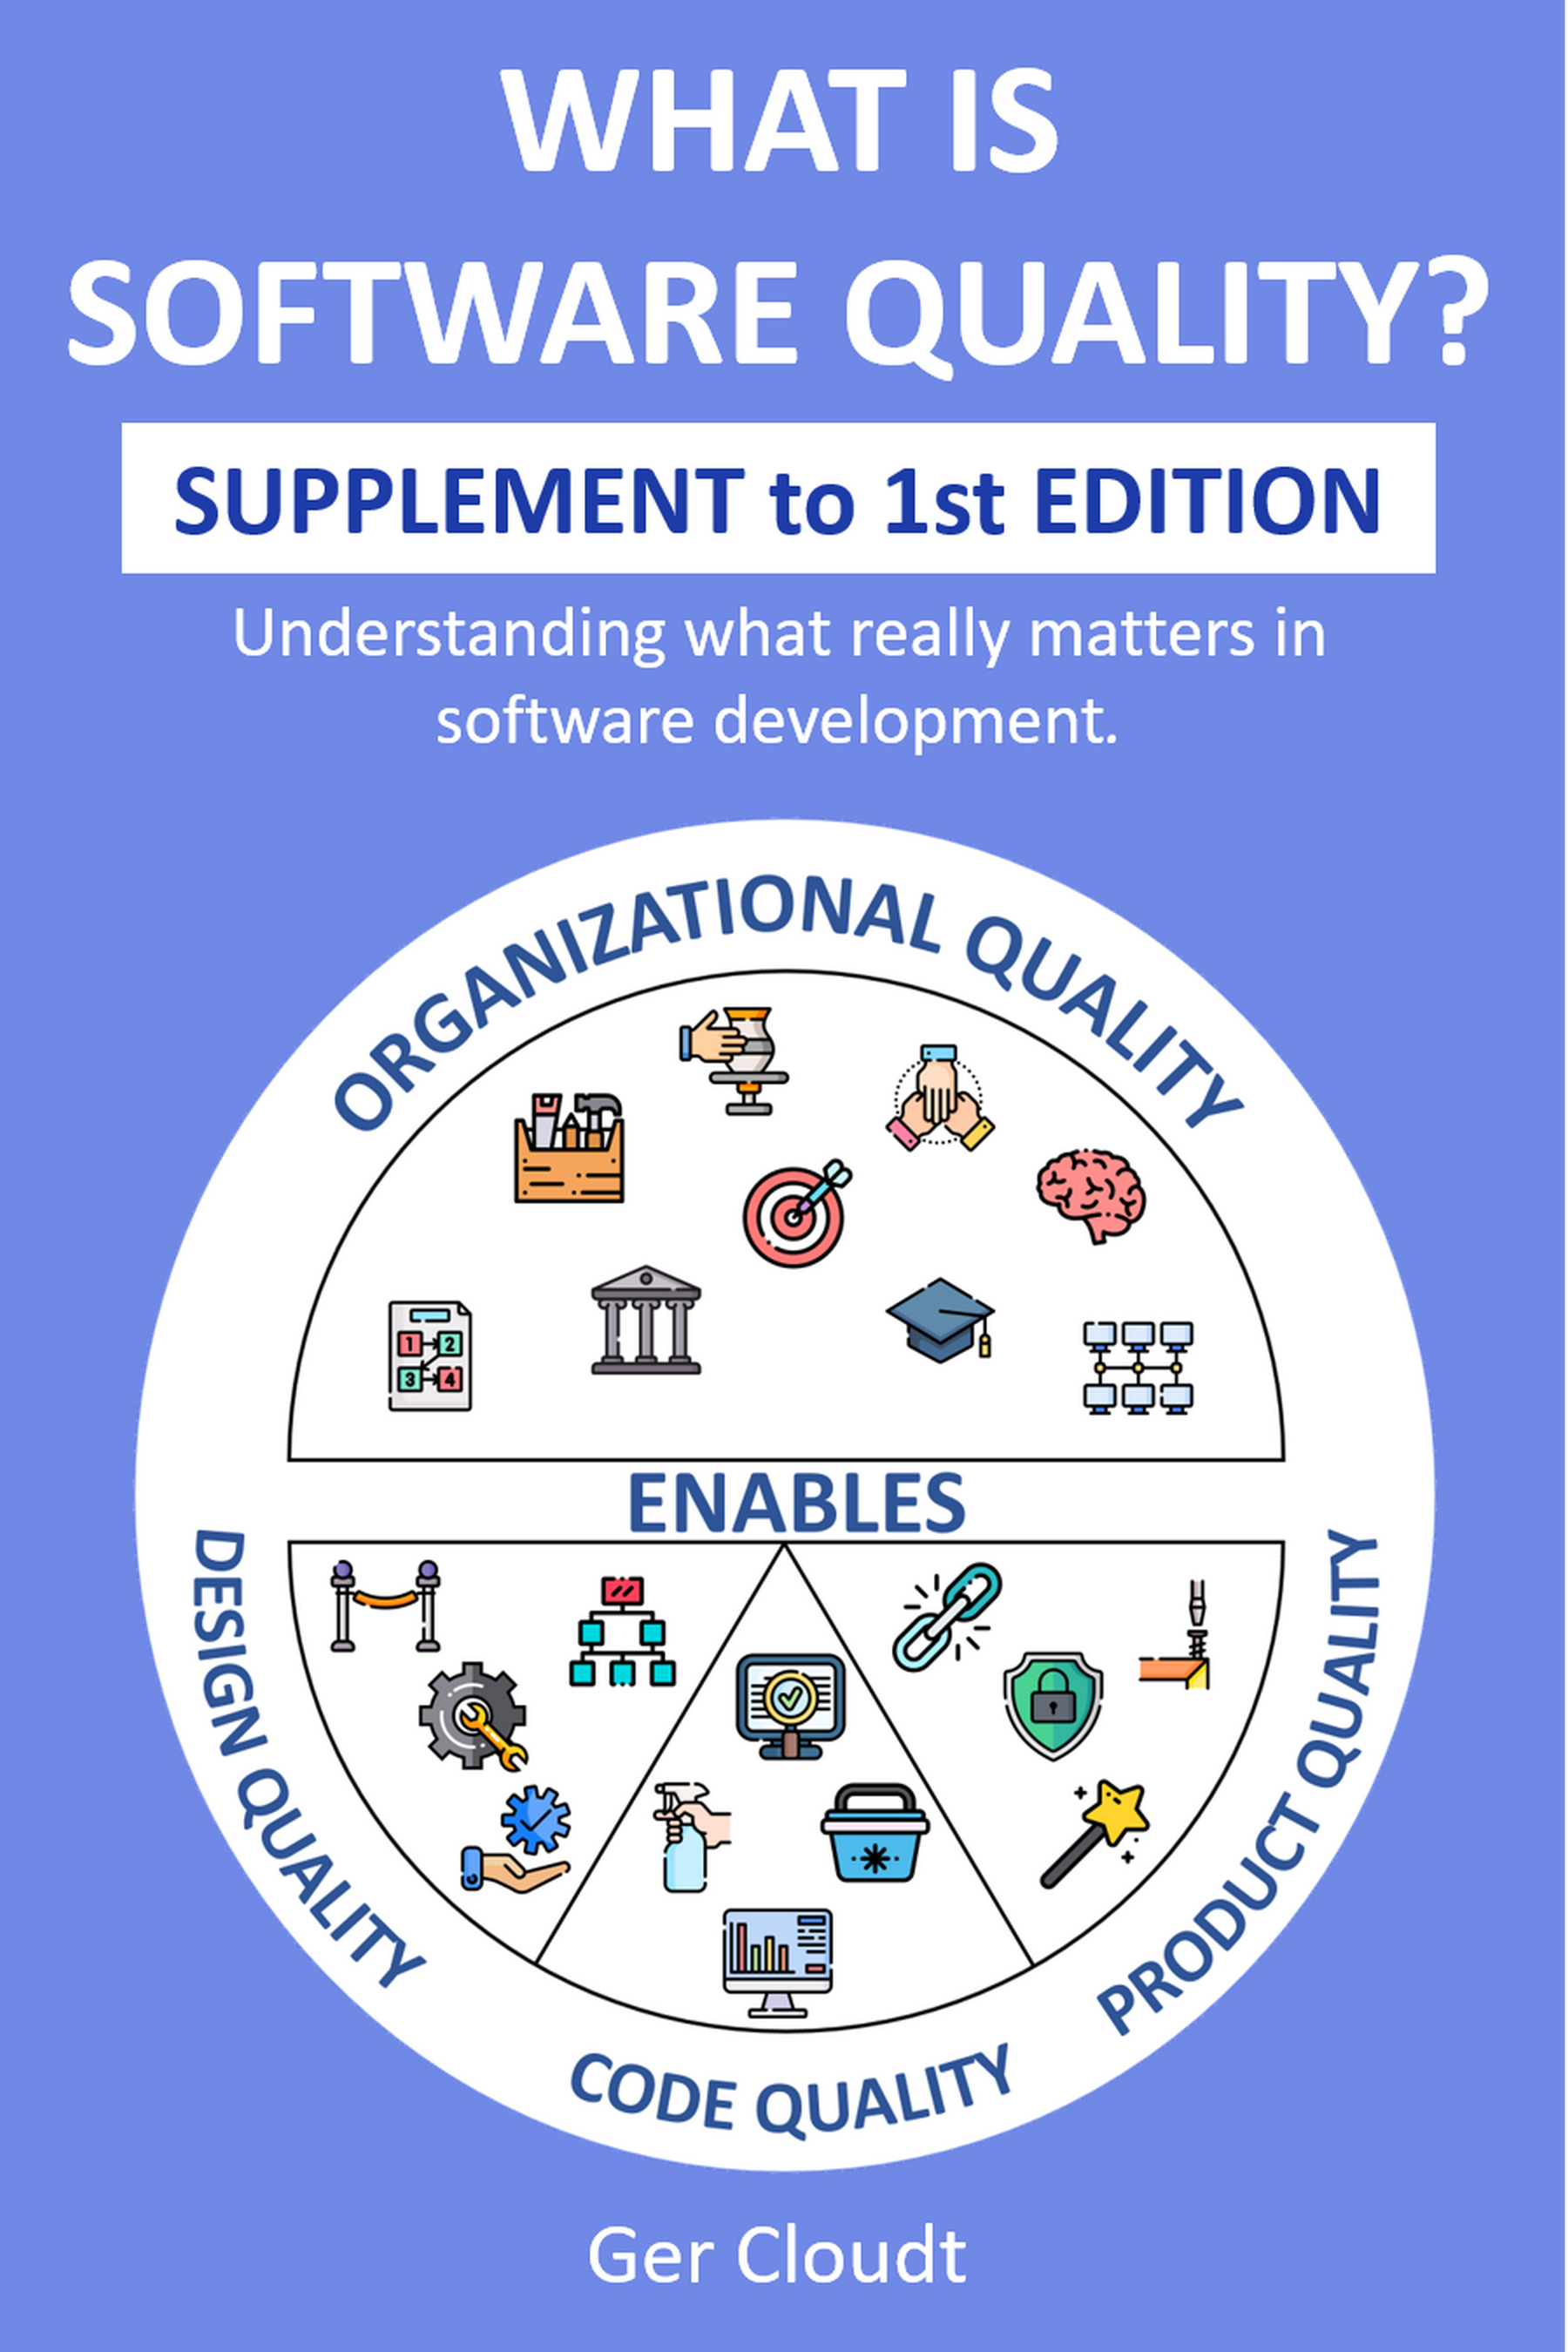 book - English - "What is Software Quality? - supplement to 1st edition"